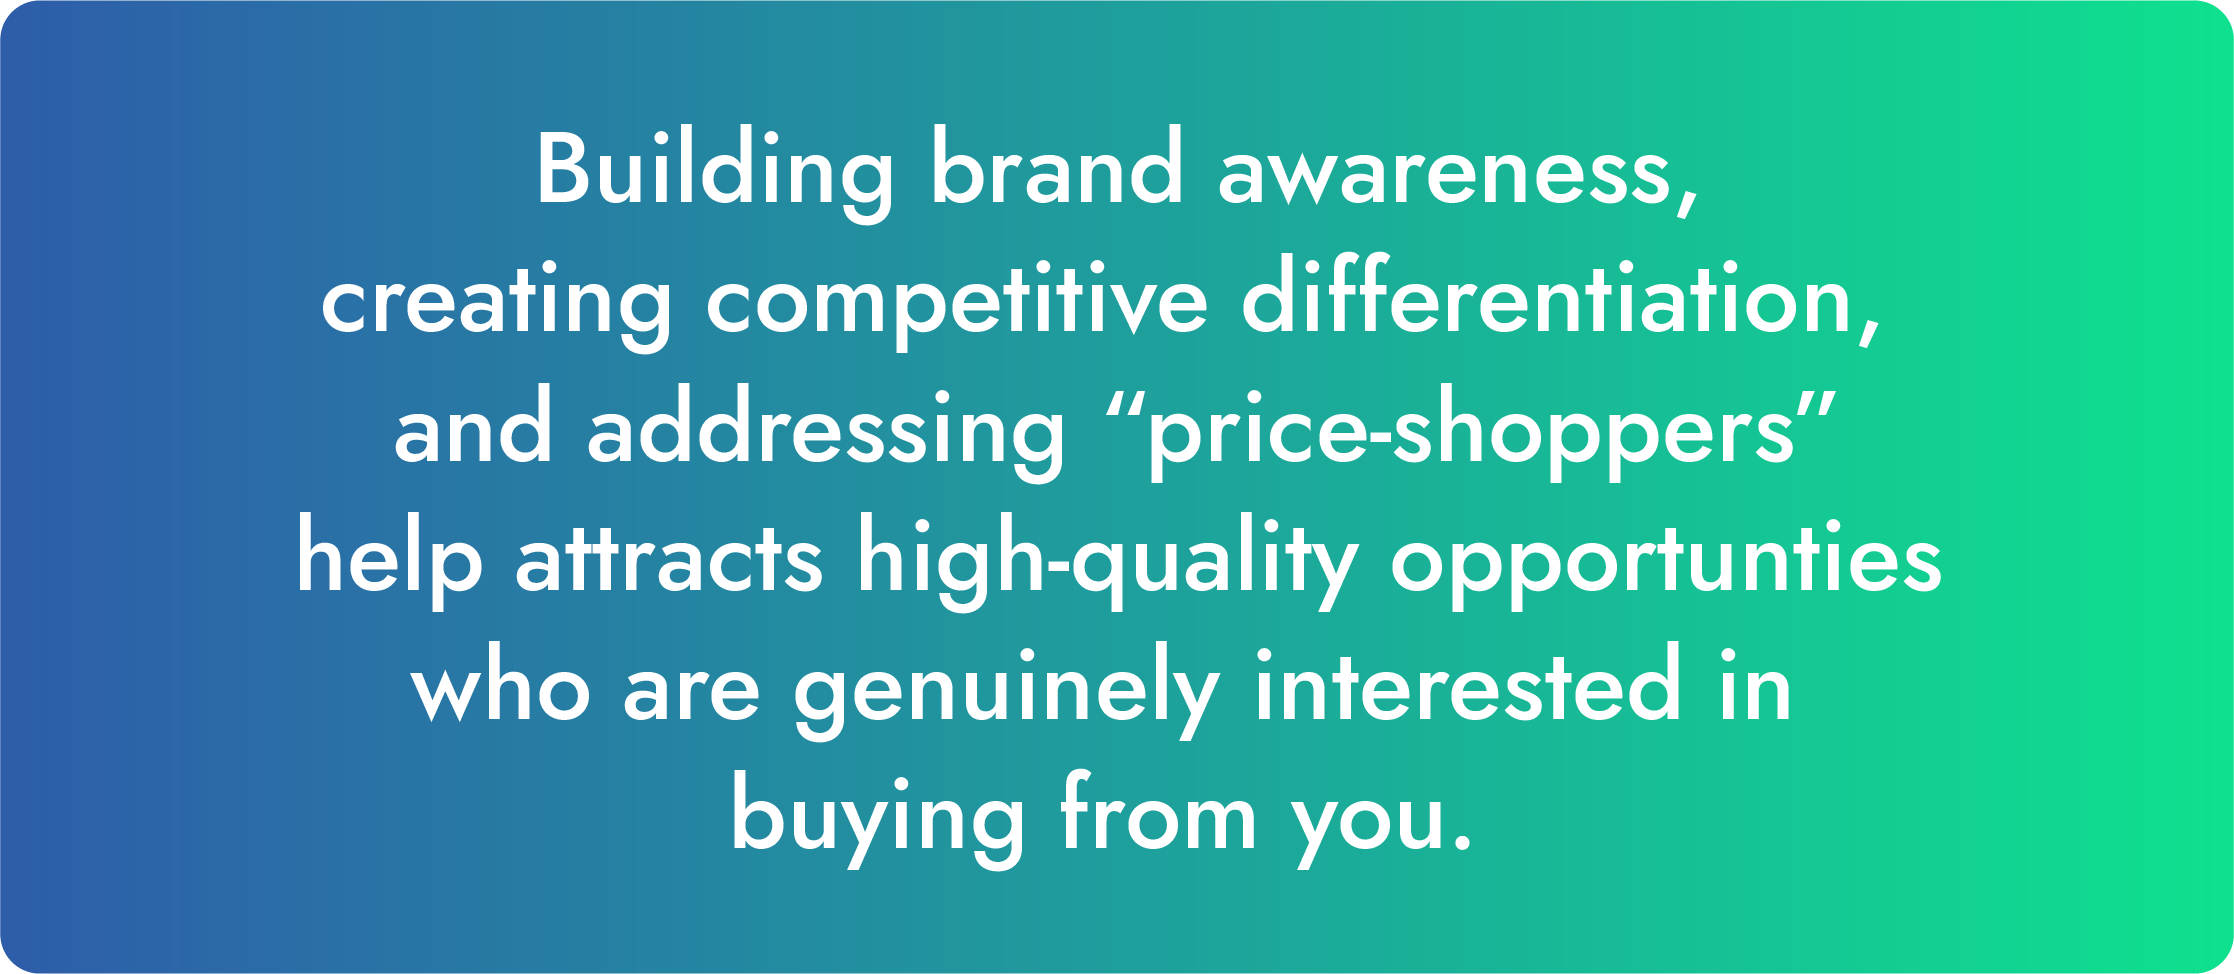 Building brand awareness, creating competitive differentiation, and addressing price-shopping concerns will help attract high-quality leads who are genuinely interested.